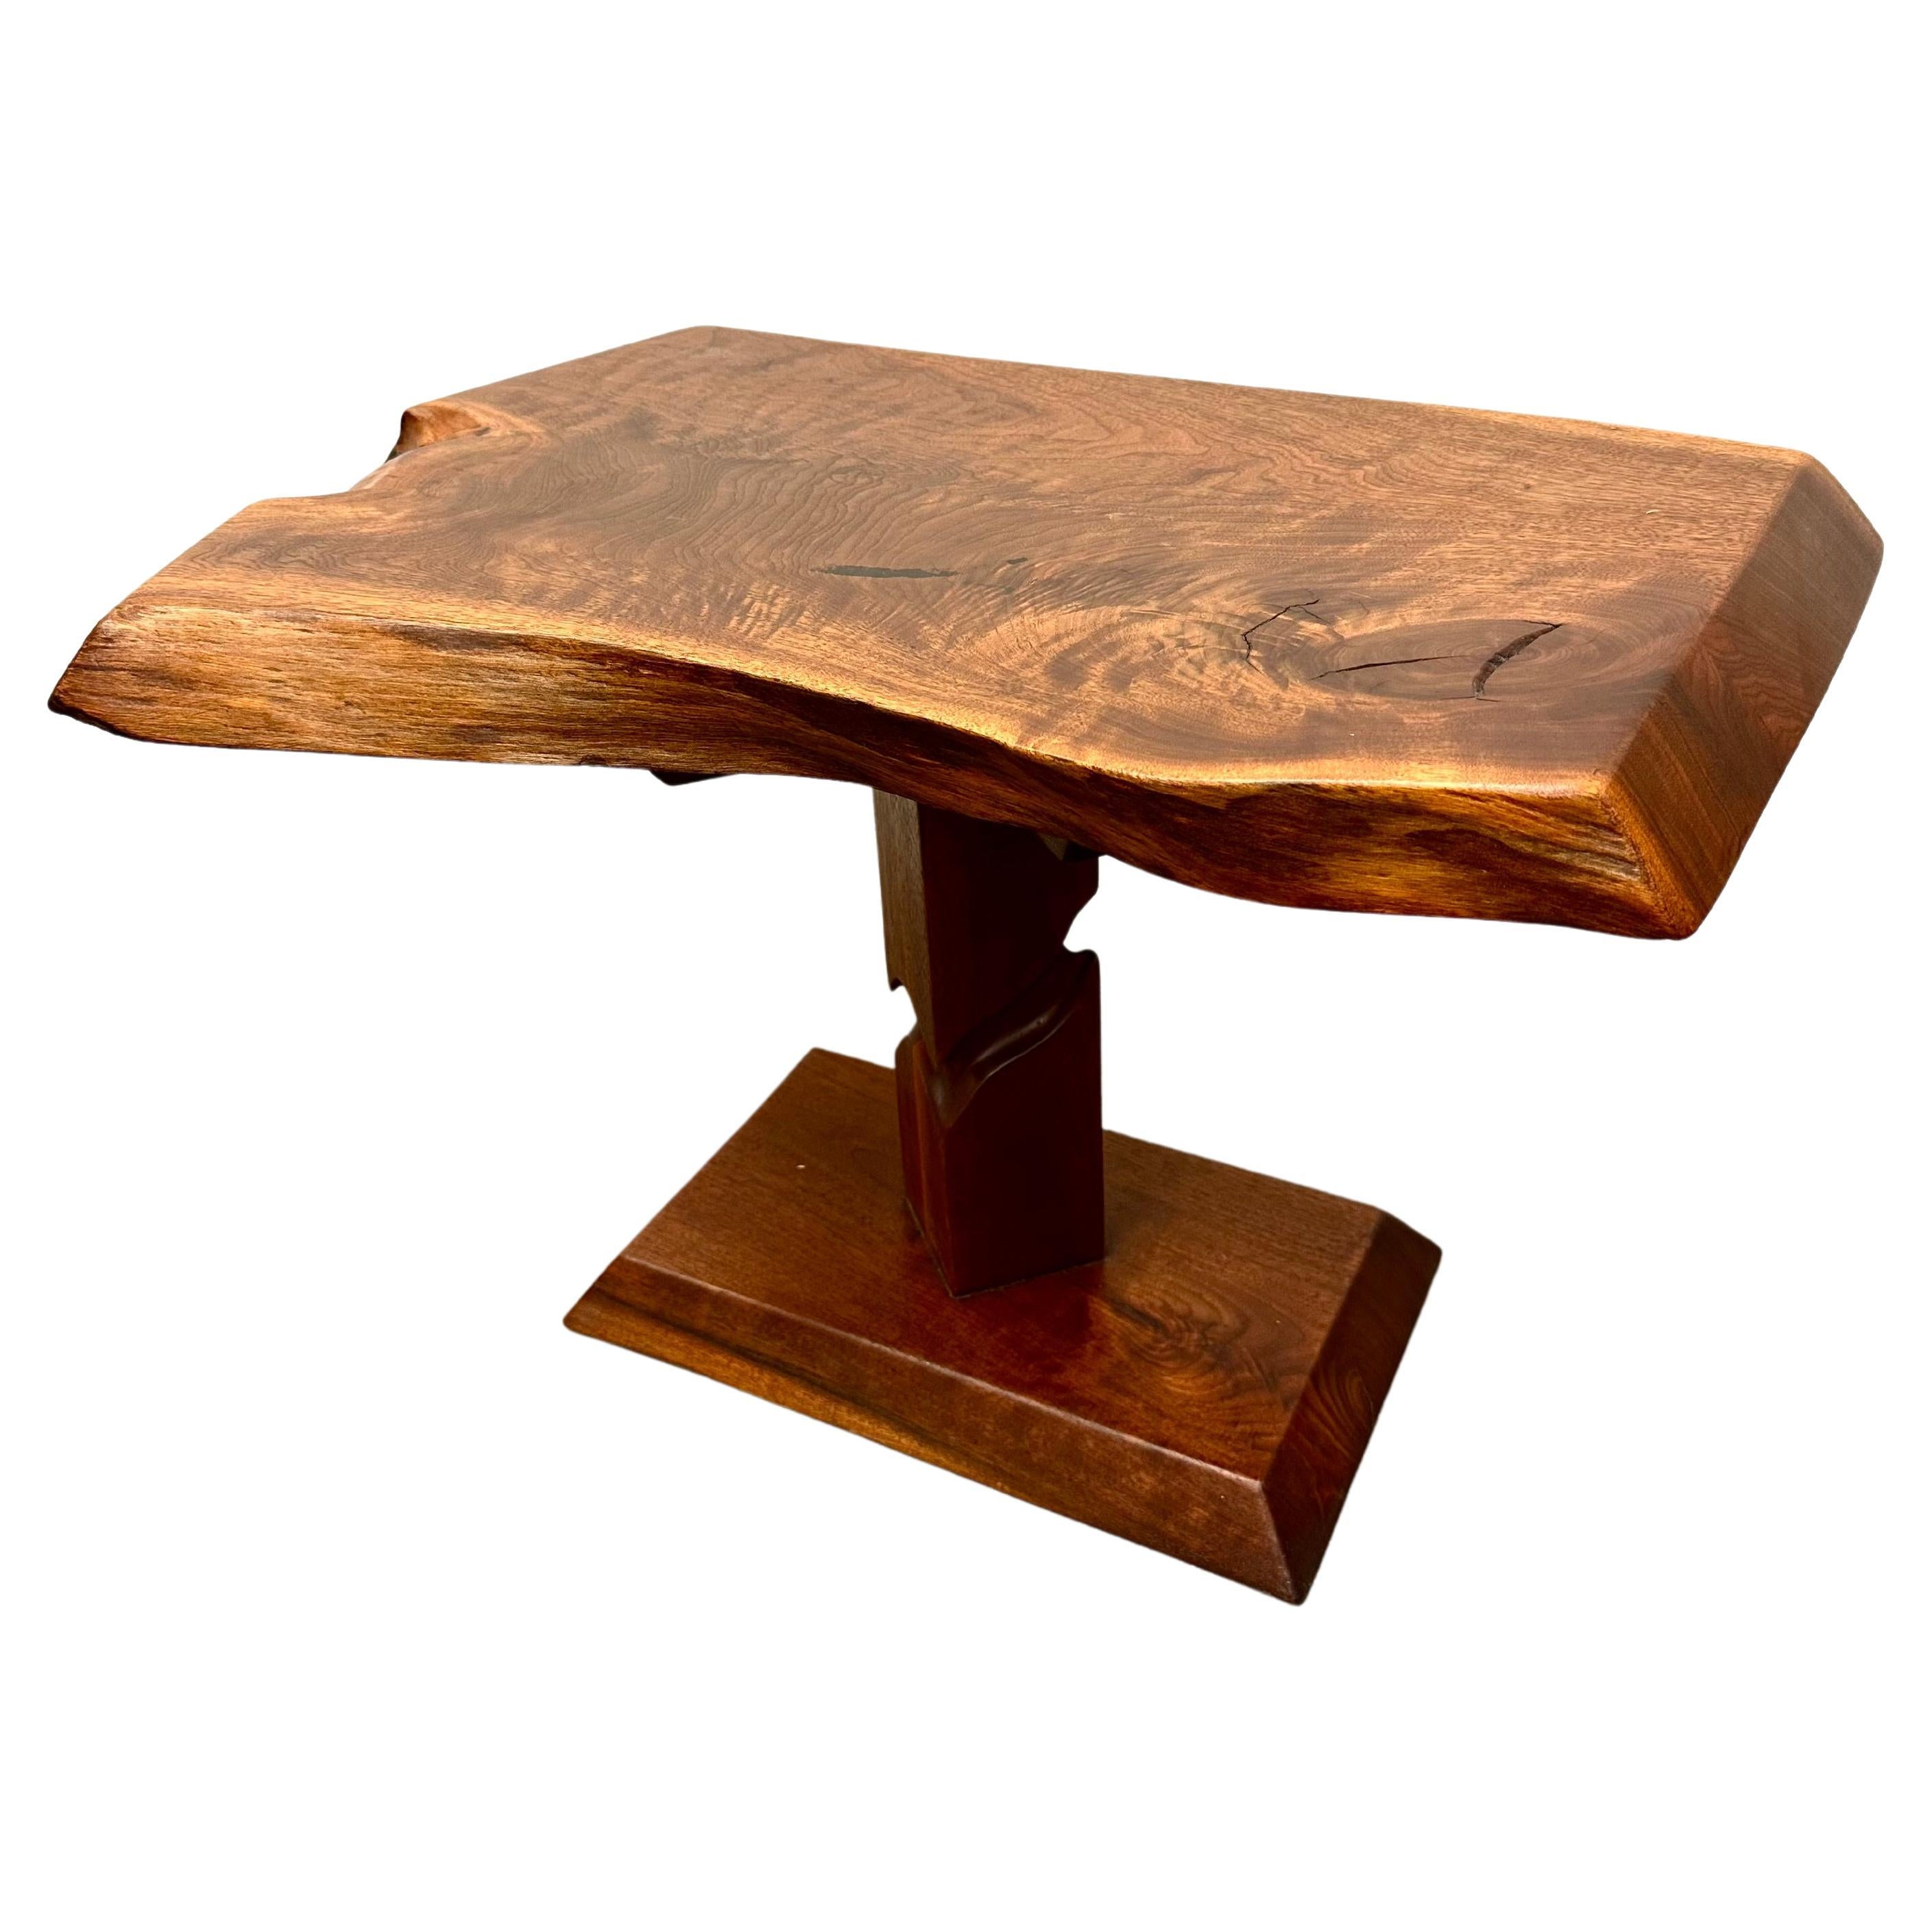 Table d'appoint American Studio Craft par Alan Rockwell